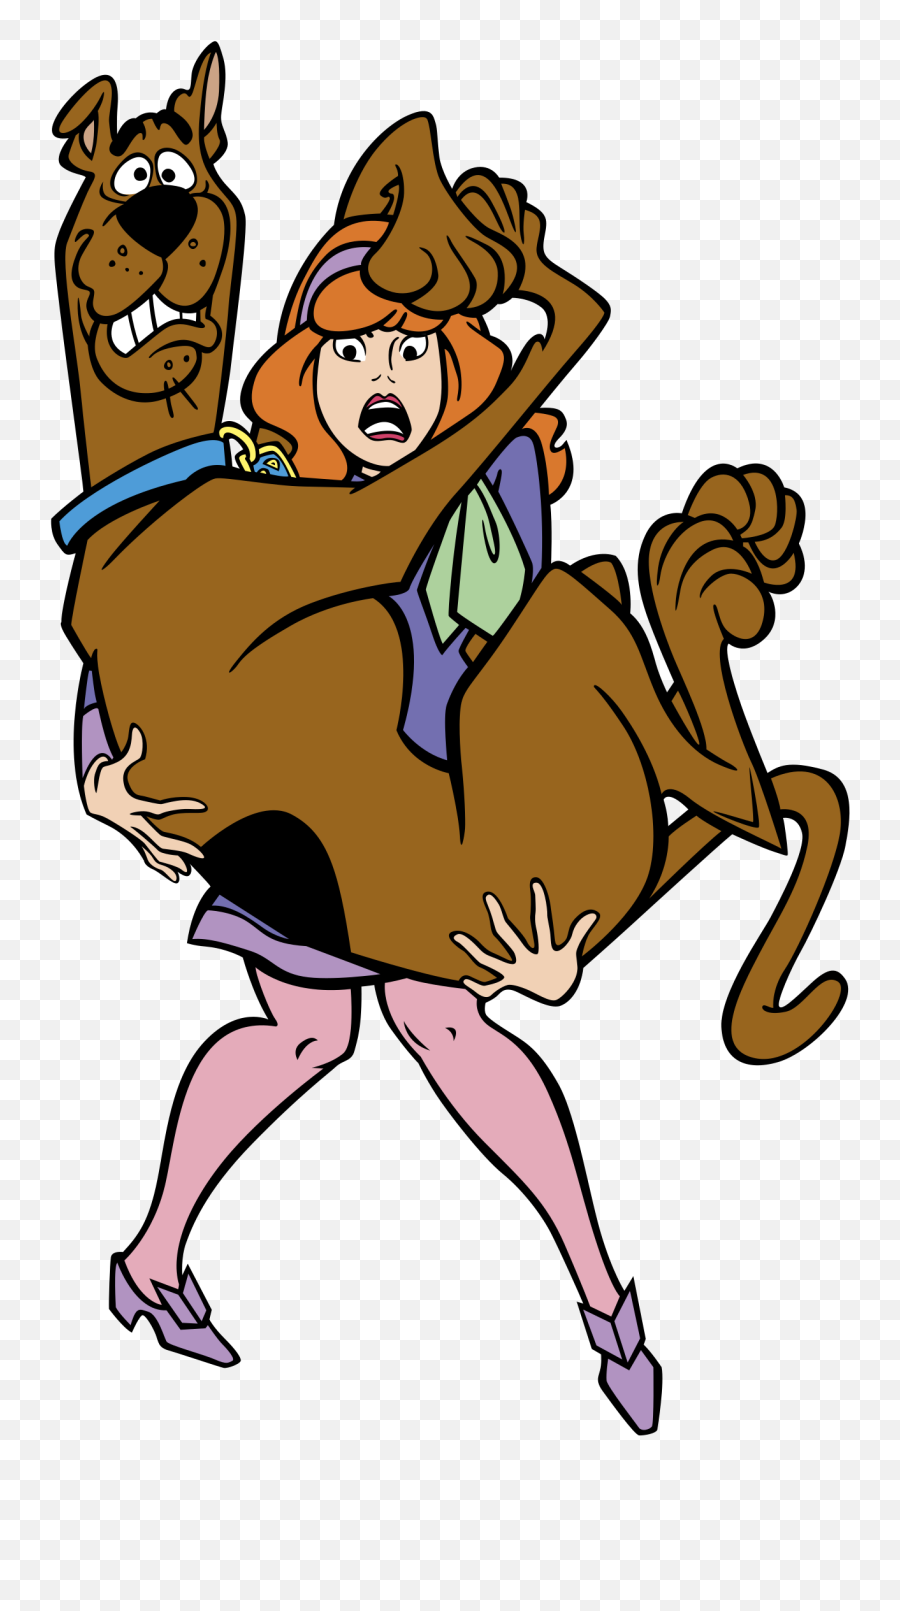 Scooby Doo Logo Png Transparent - Scooby Doo Daphne Scared Scooby Doo Daphne Scared Emoji,Scared Emoji Transparent Background